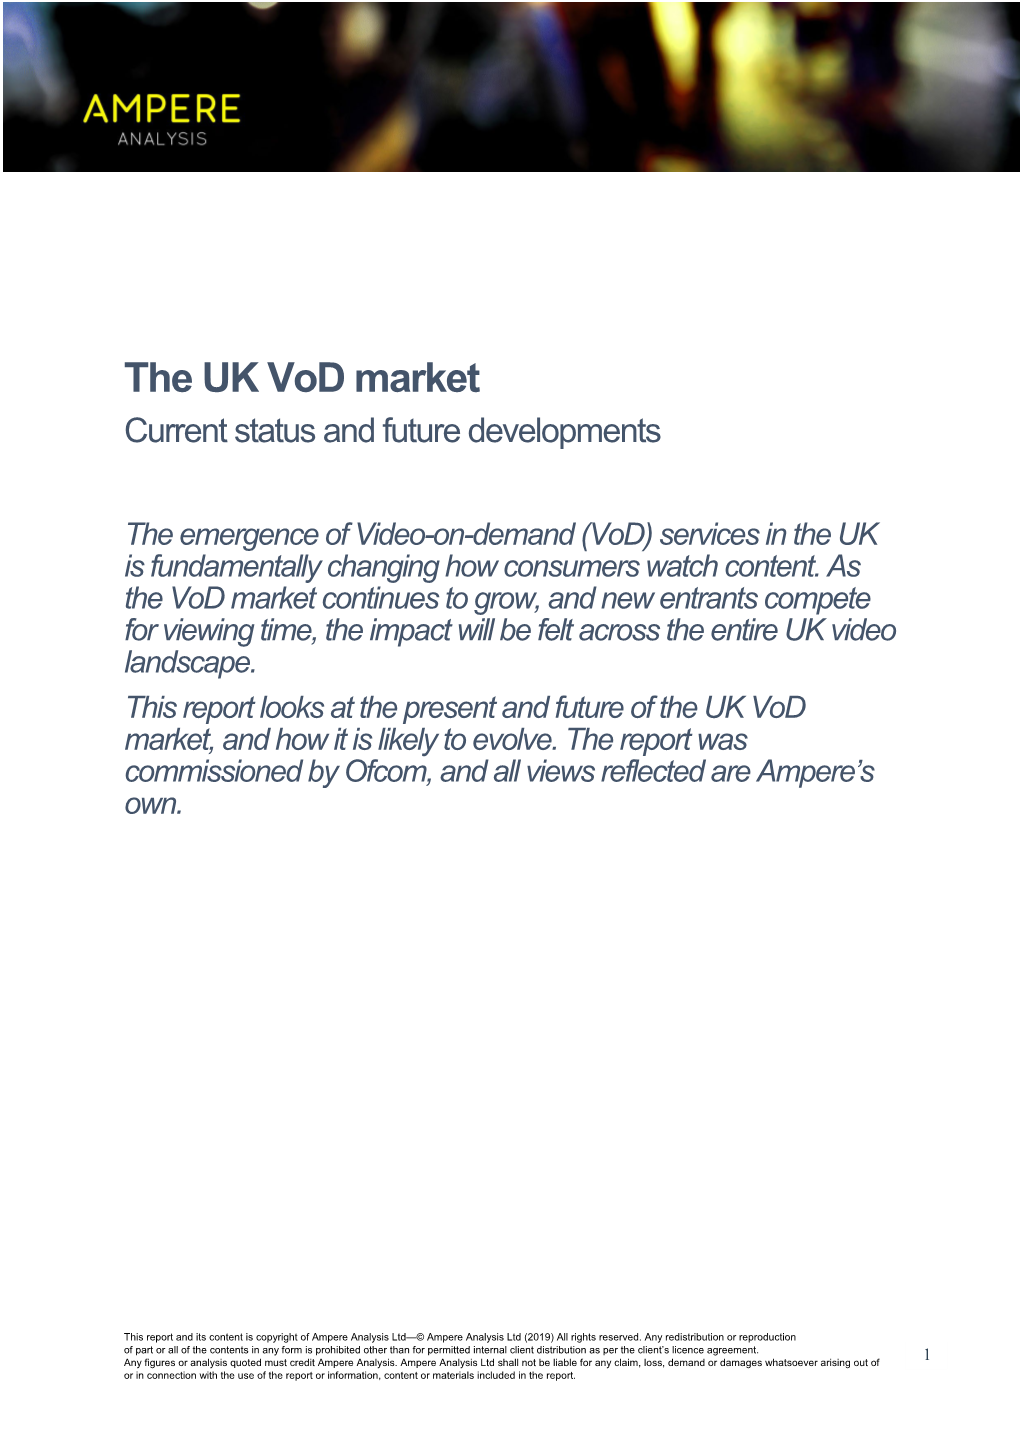 The UK Vod Market Current Status and Future Developments